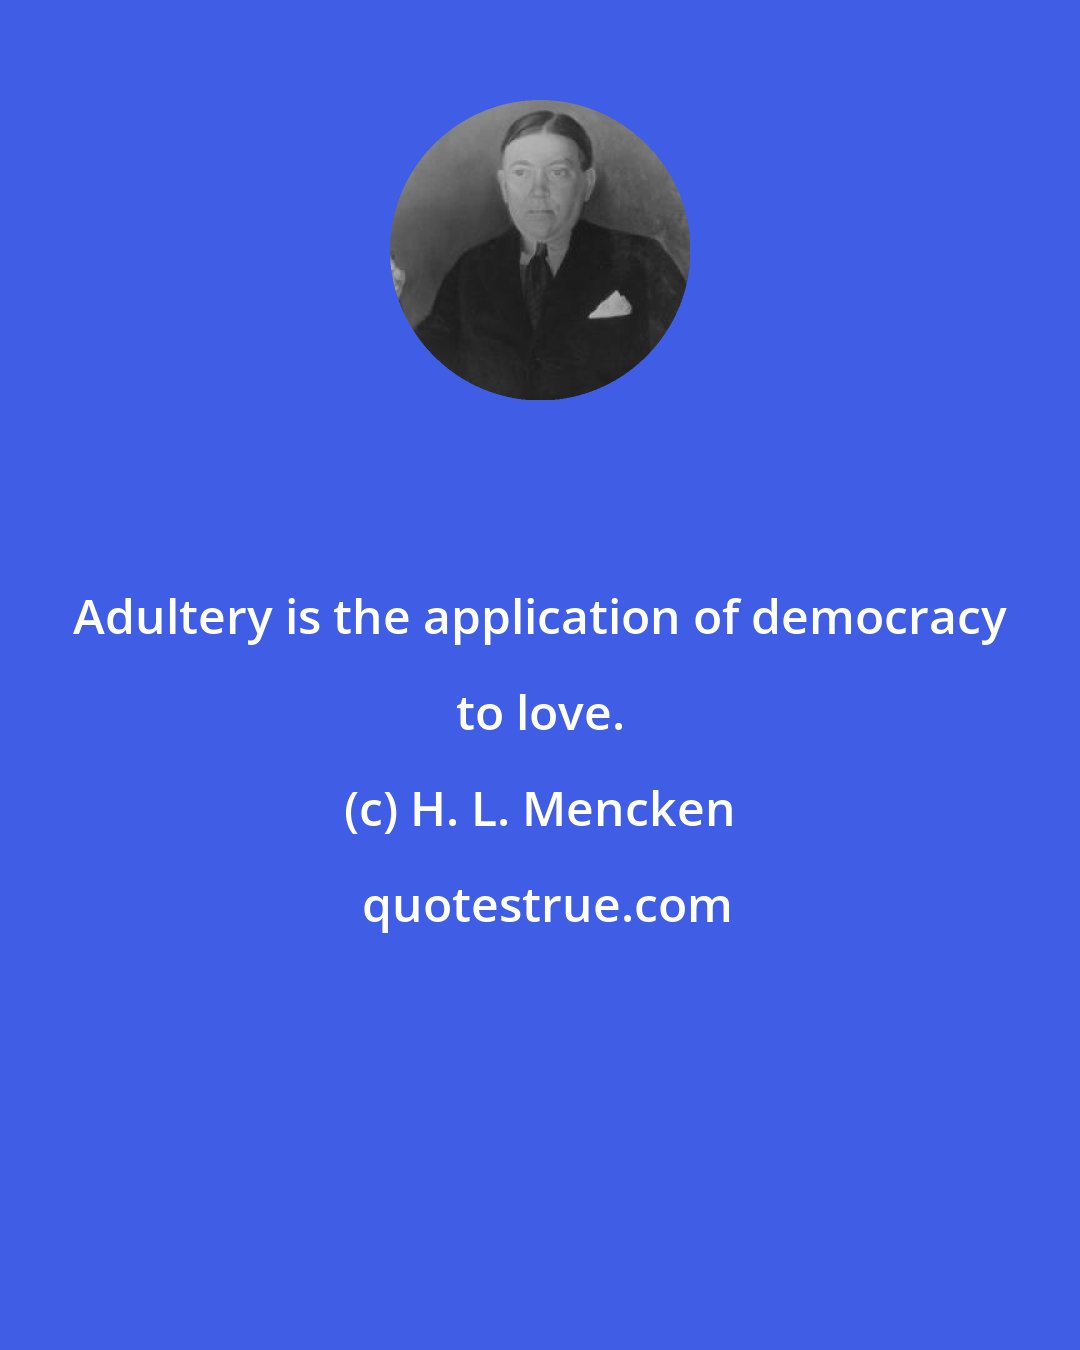 H. L. Mencken: Adultery is the application of democracy to love.